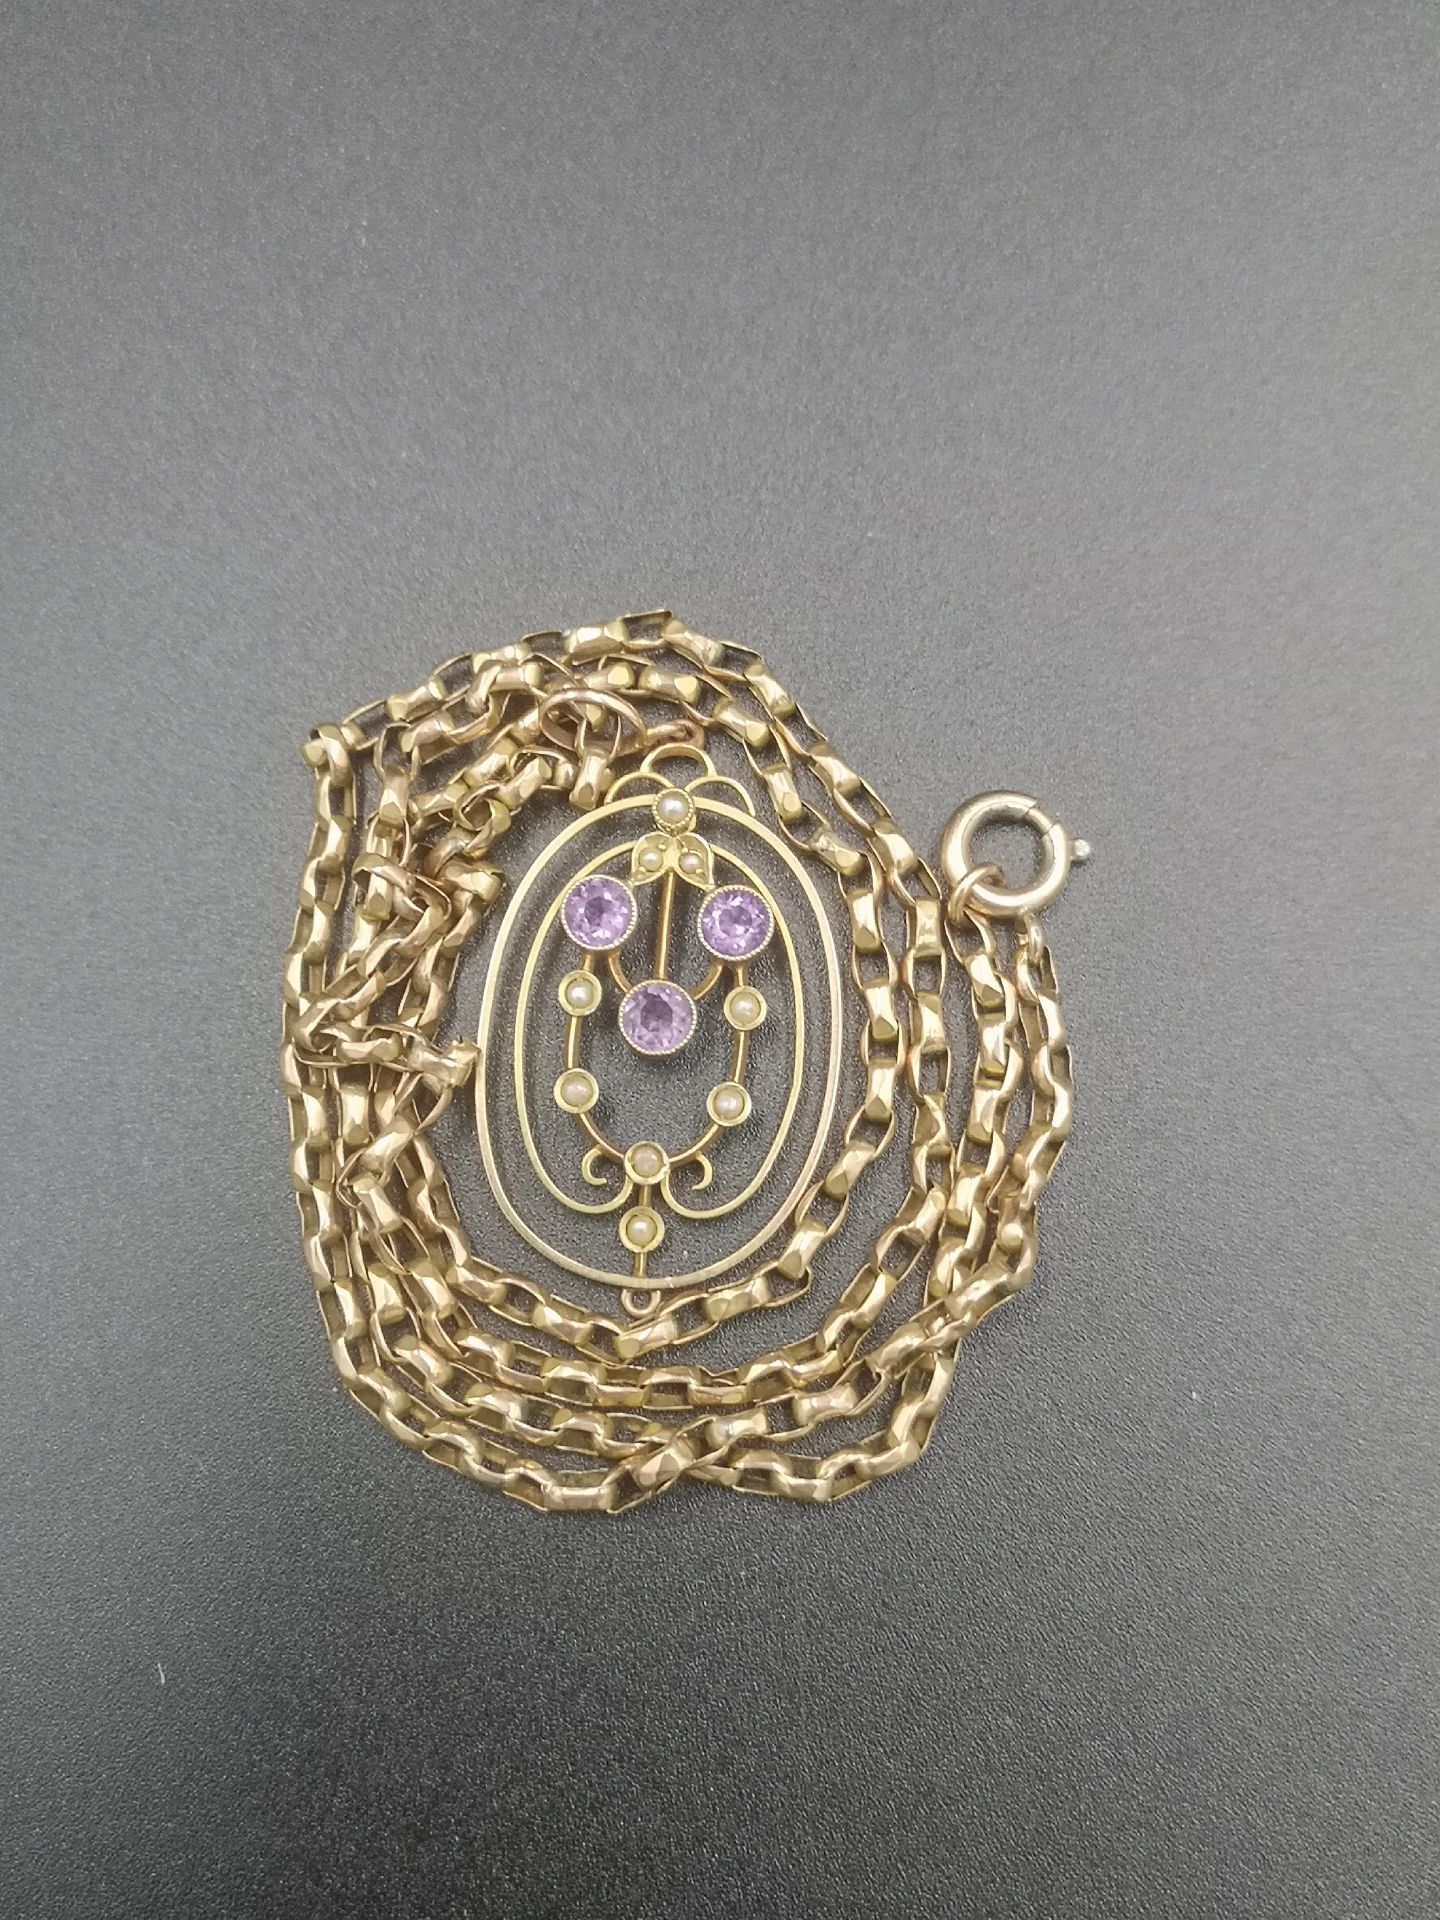 Yellow metal necklace with 9ct gold pendant - Image 3 of 5